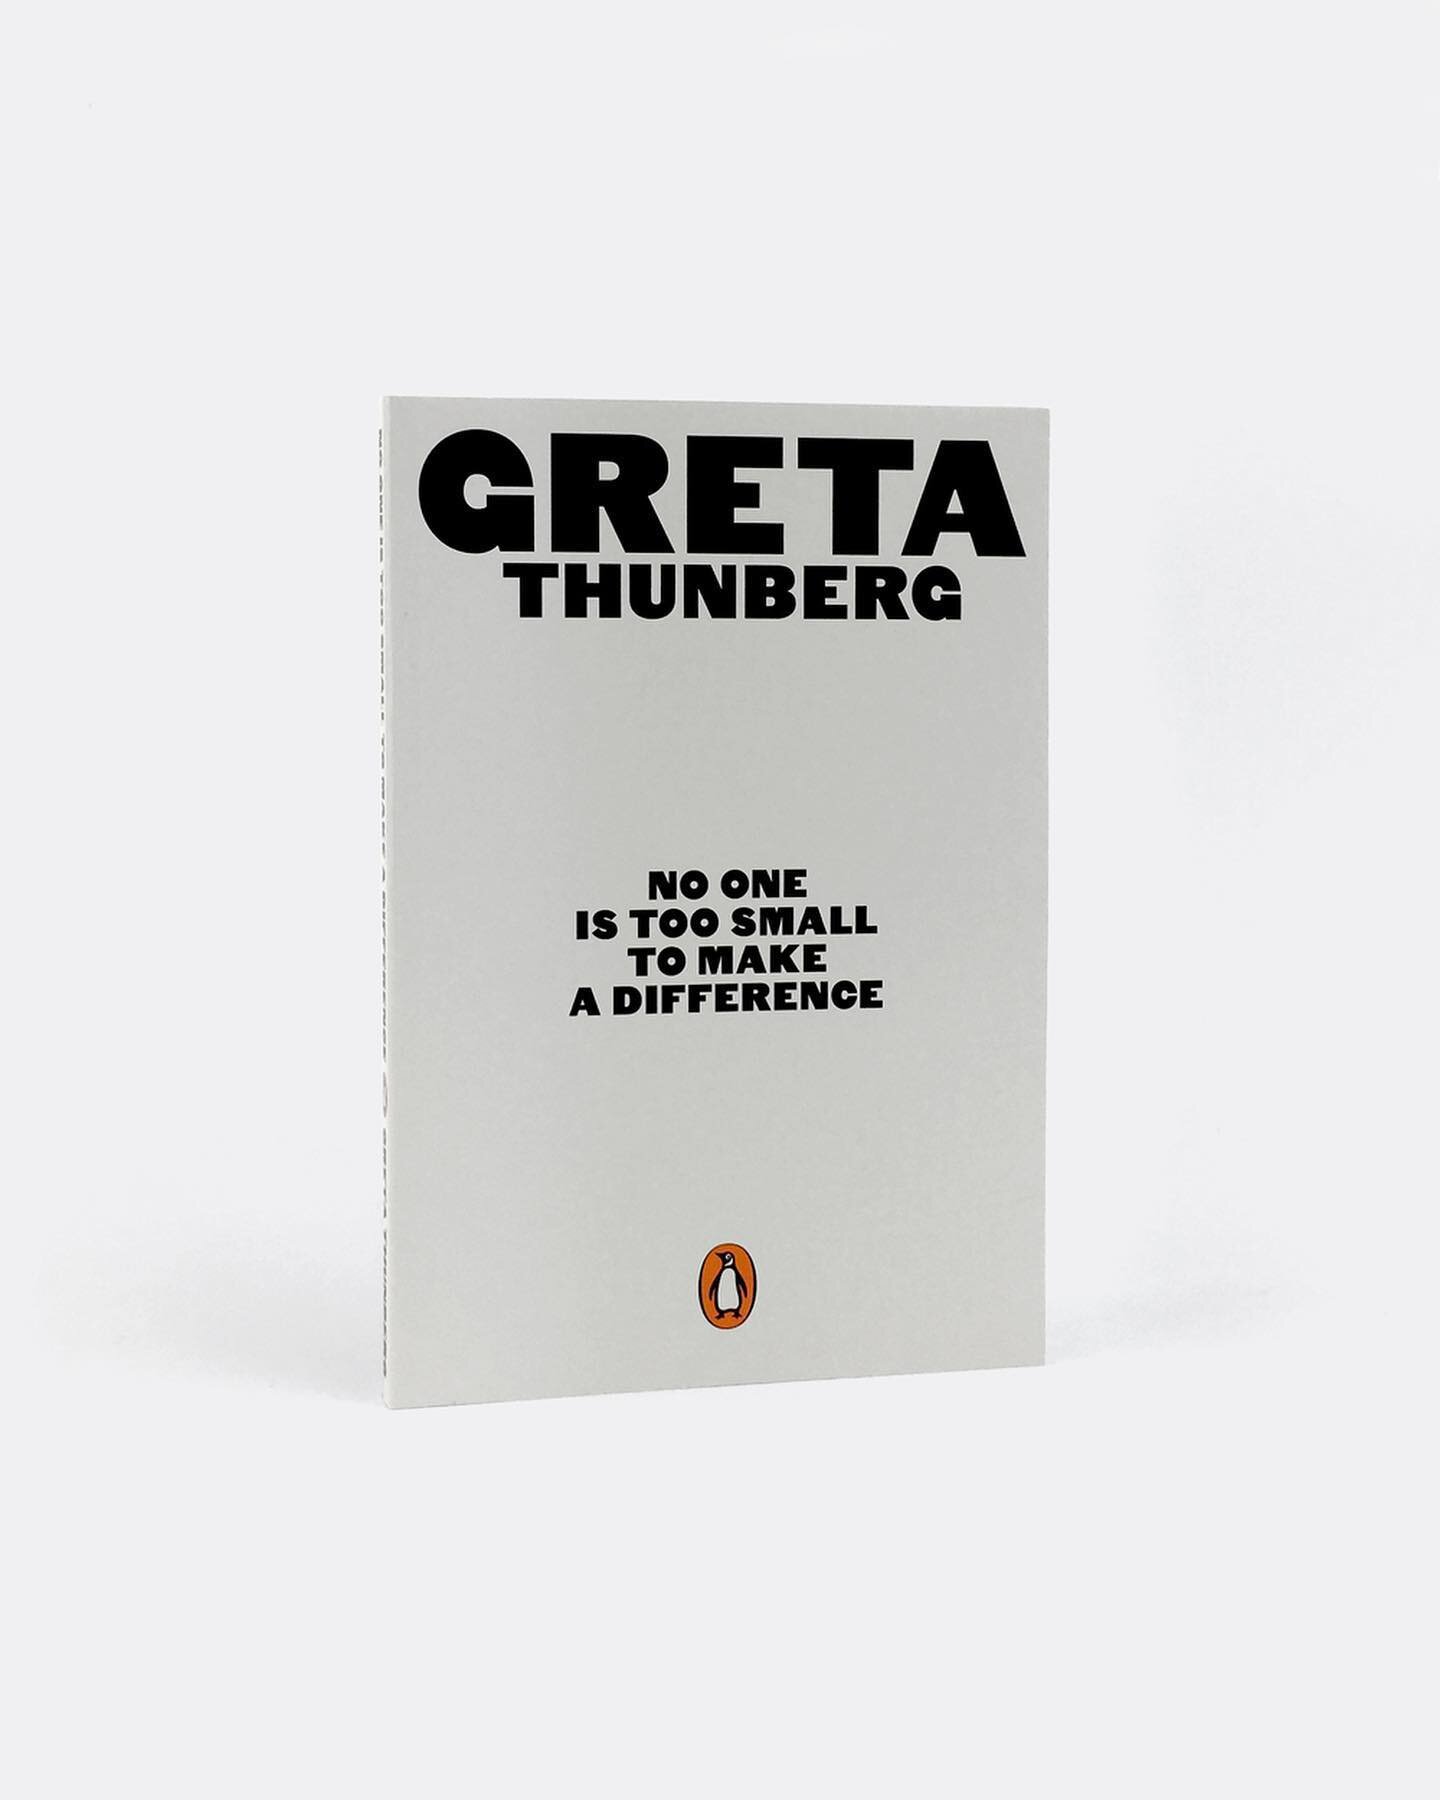 This weekend we&rsquo;ve posted the first in a series of #recommendedreading articles. We&rsquo;re calling the series &lsquo;Books to Influence Change&rsquo;. Each focusses on aspects of our changing Earth.
⠀
#GretaThunberg
#NaomiKlein
#RobertMacfarl